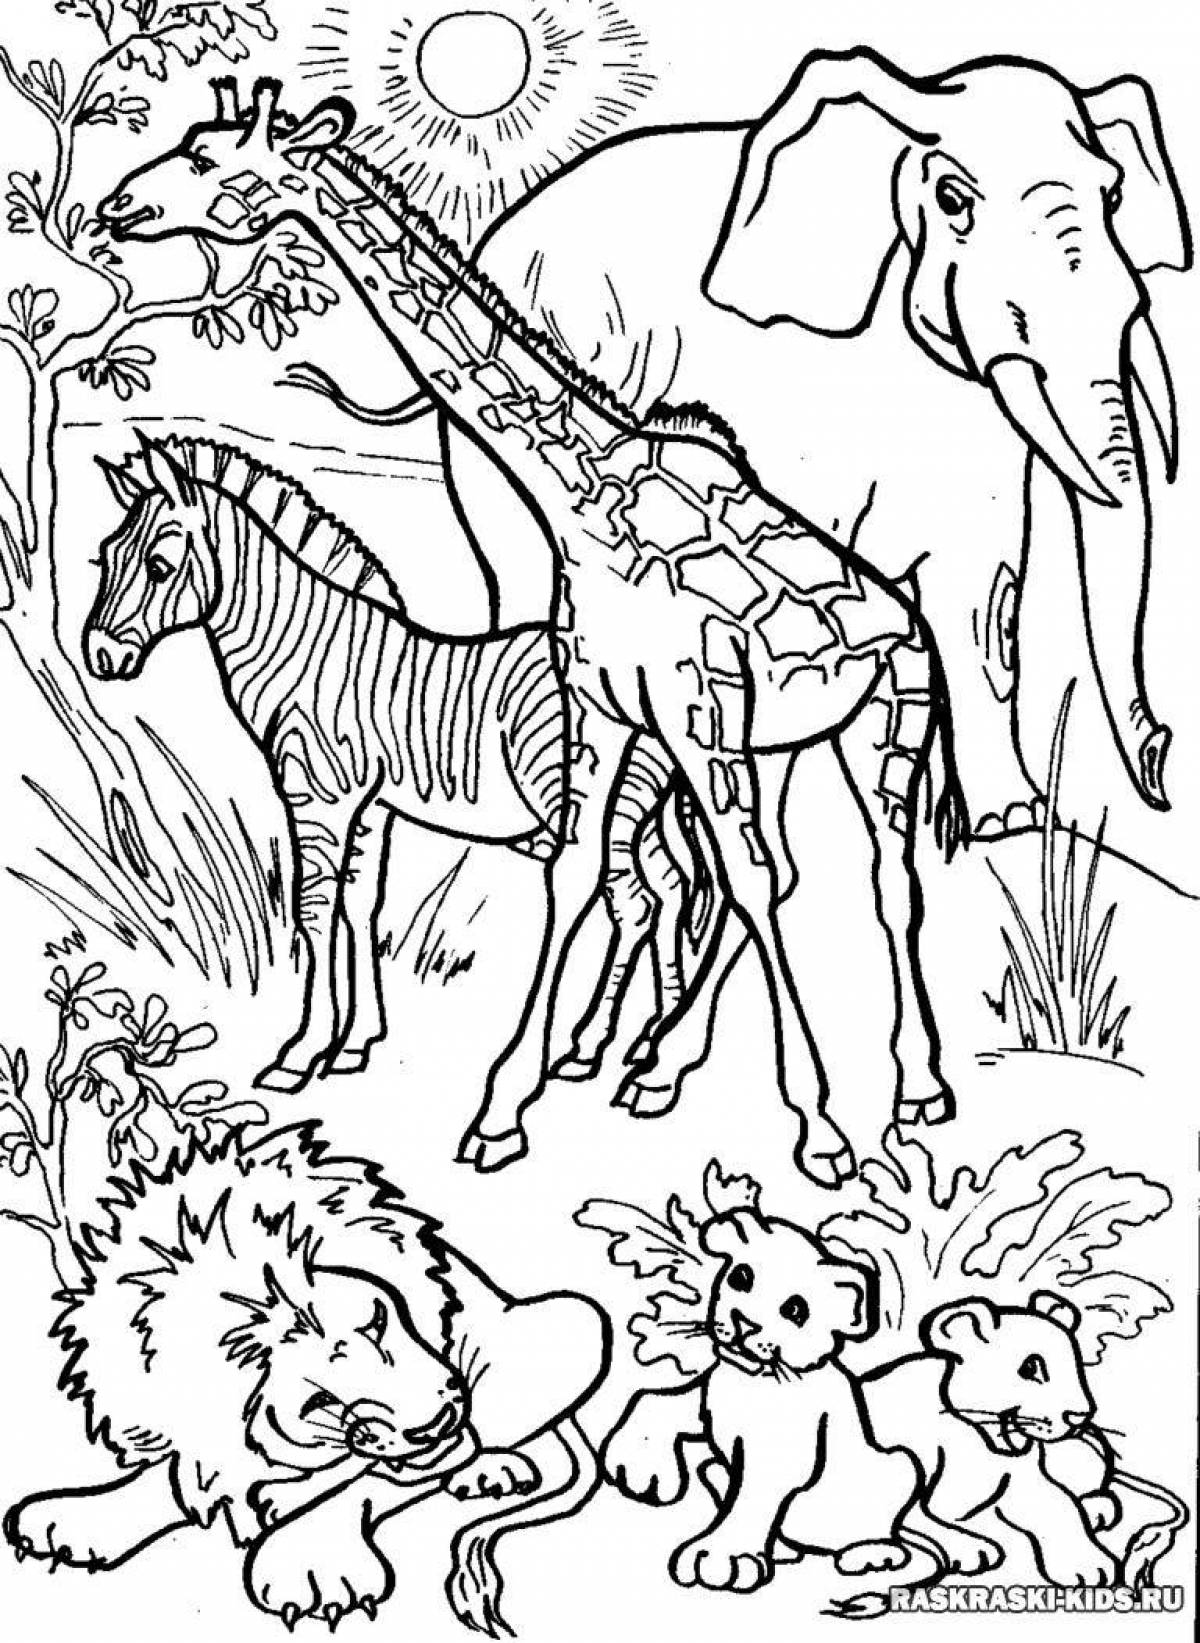 Amazing African coloring book for kids